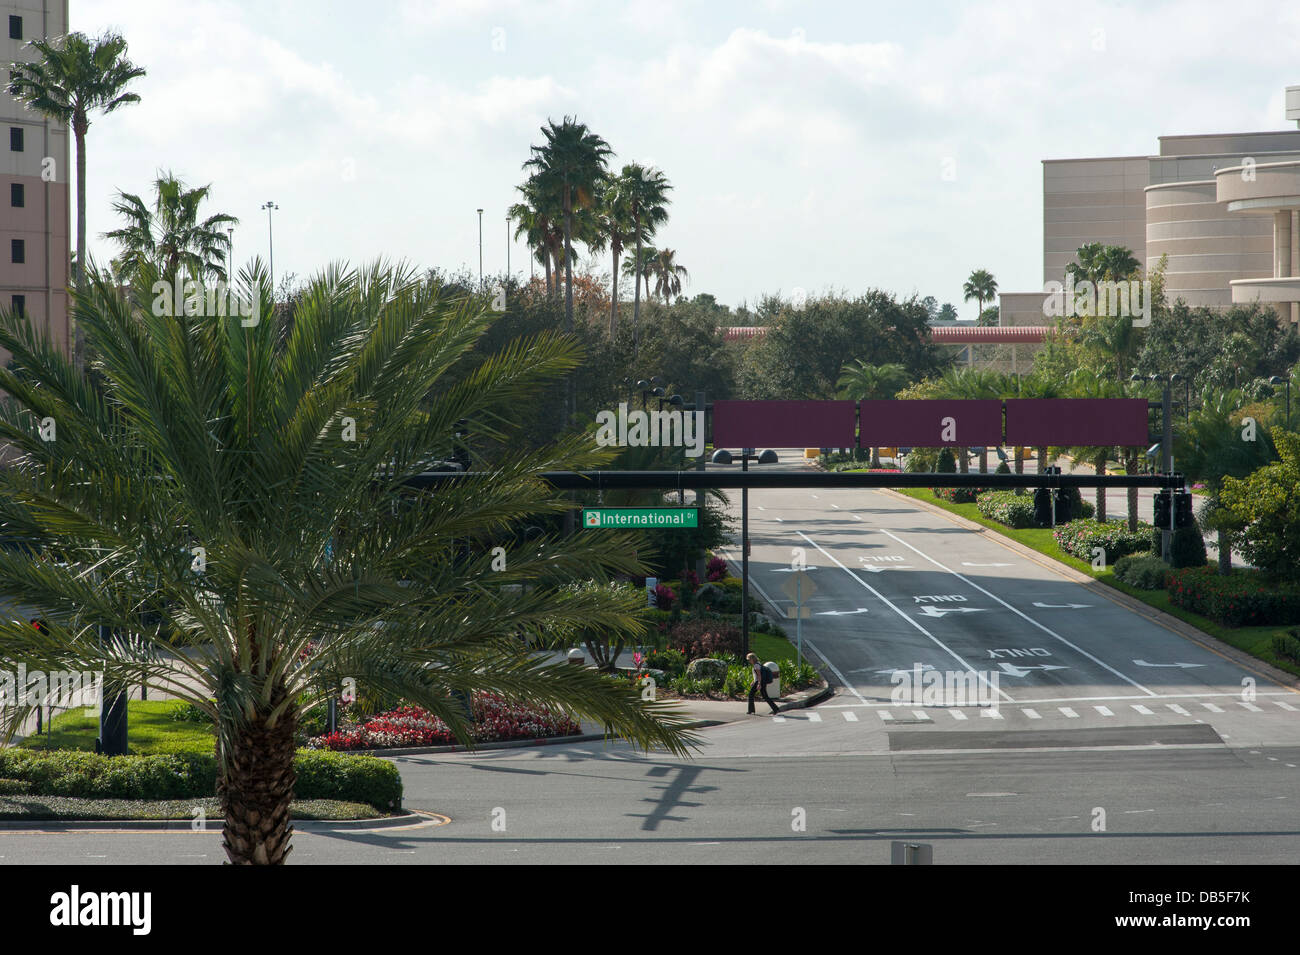 Pedestrian crossing the road, International Drive road sign clearly visible, close to the convention center, Orlando Florida. Stock Photo